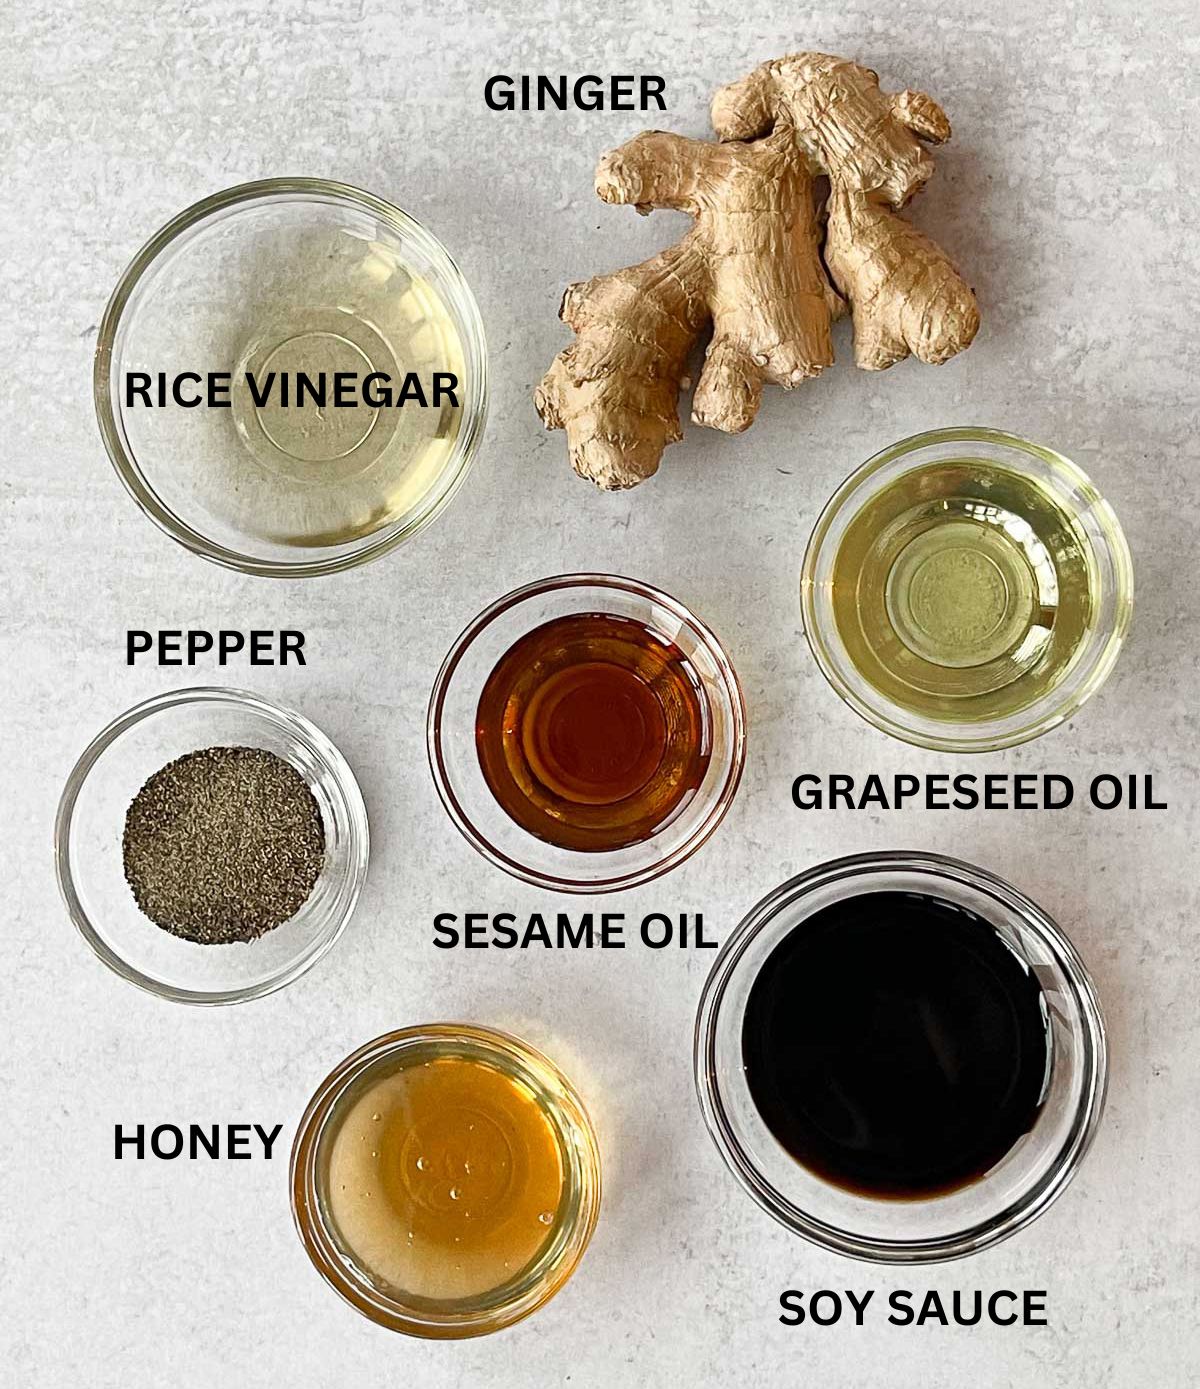 Labeled ingredients in small glass bowls for making the dressing for Chinese chicken salad along with a ginger root, on a gray surface.